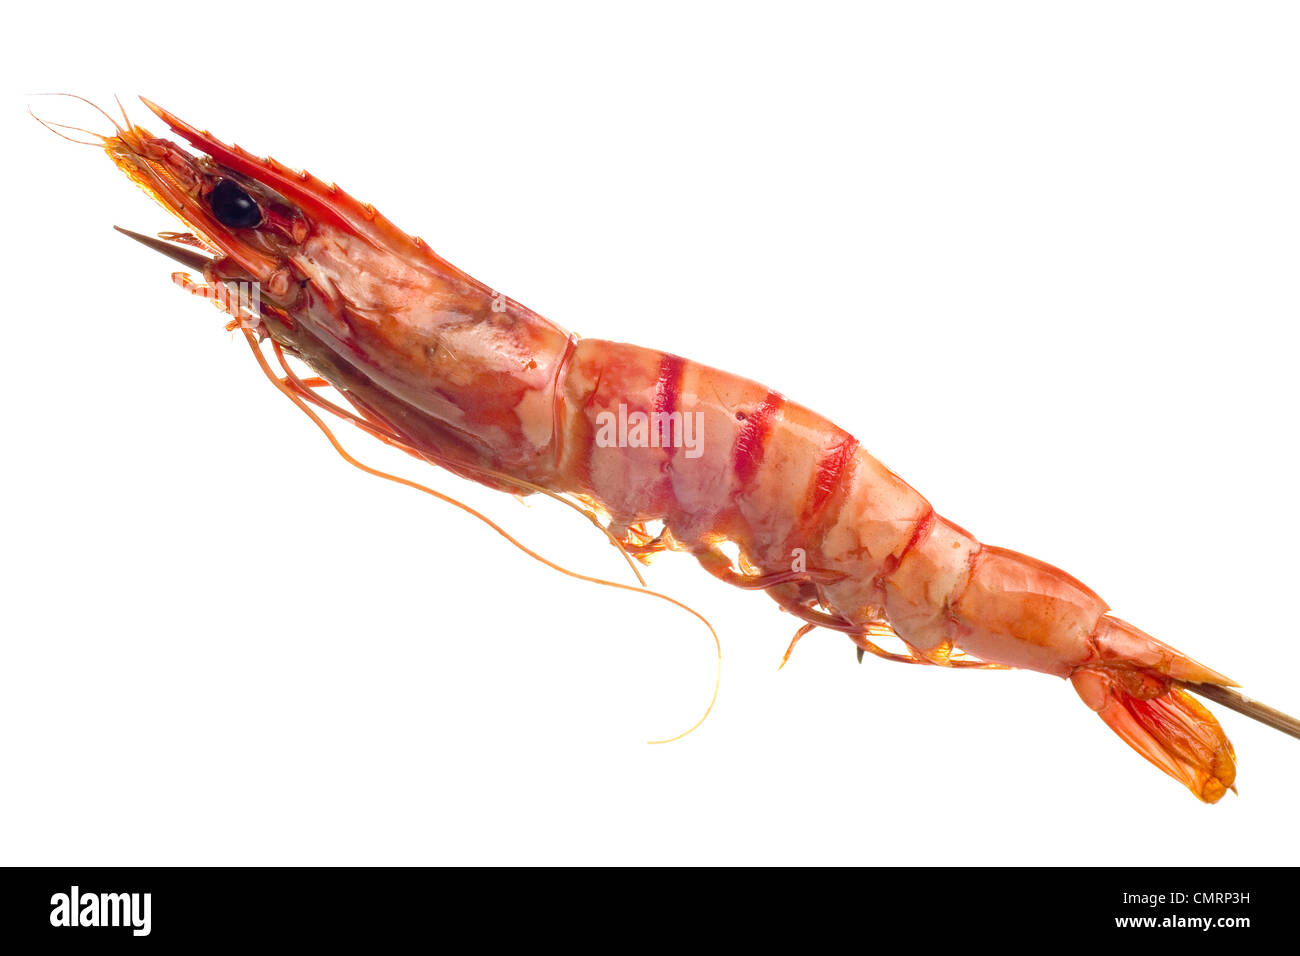 Grilled tiger prawn on a skewer isolated on white background Stock Photo